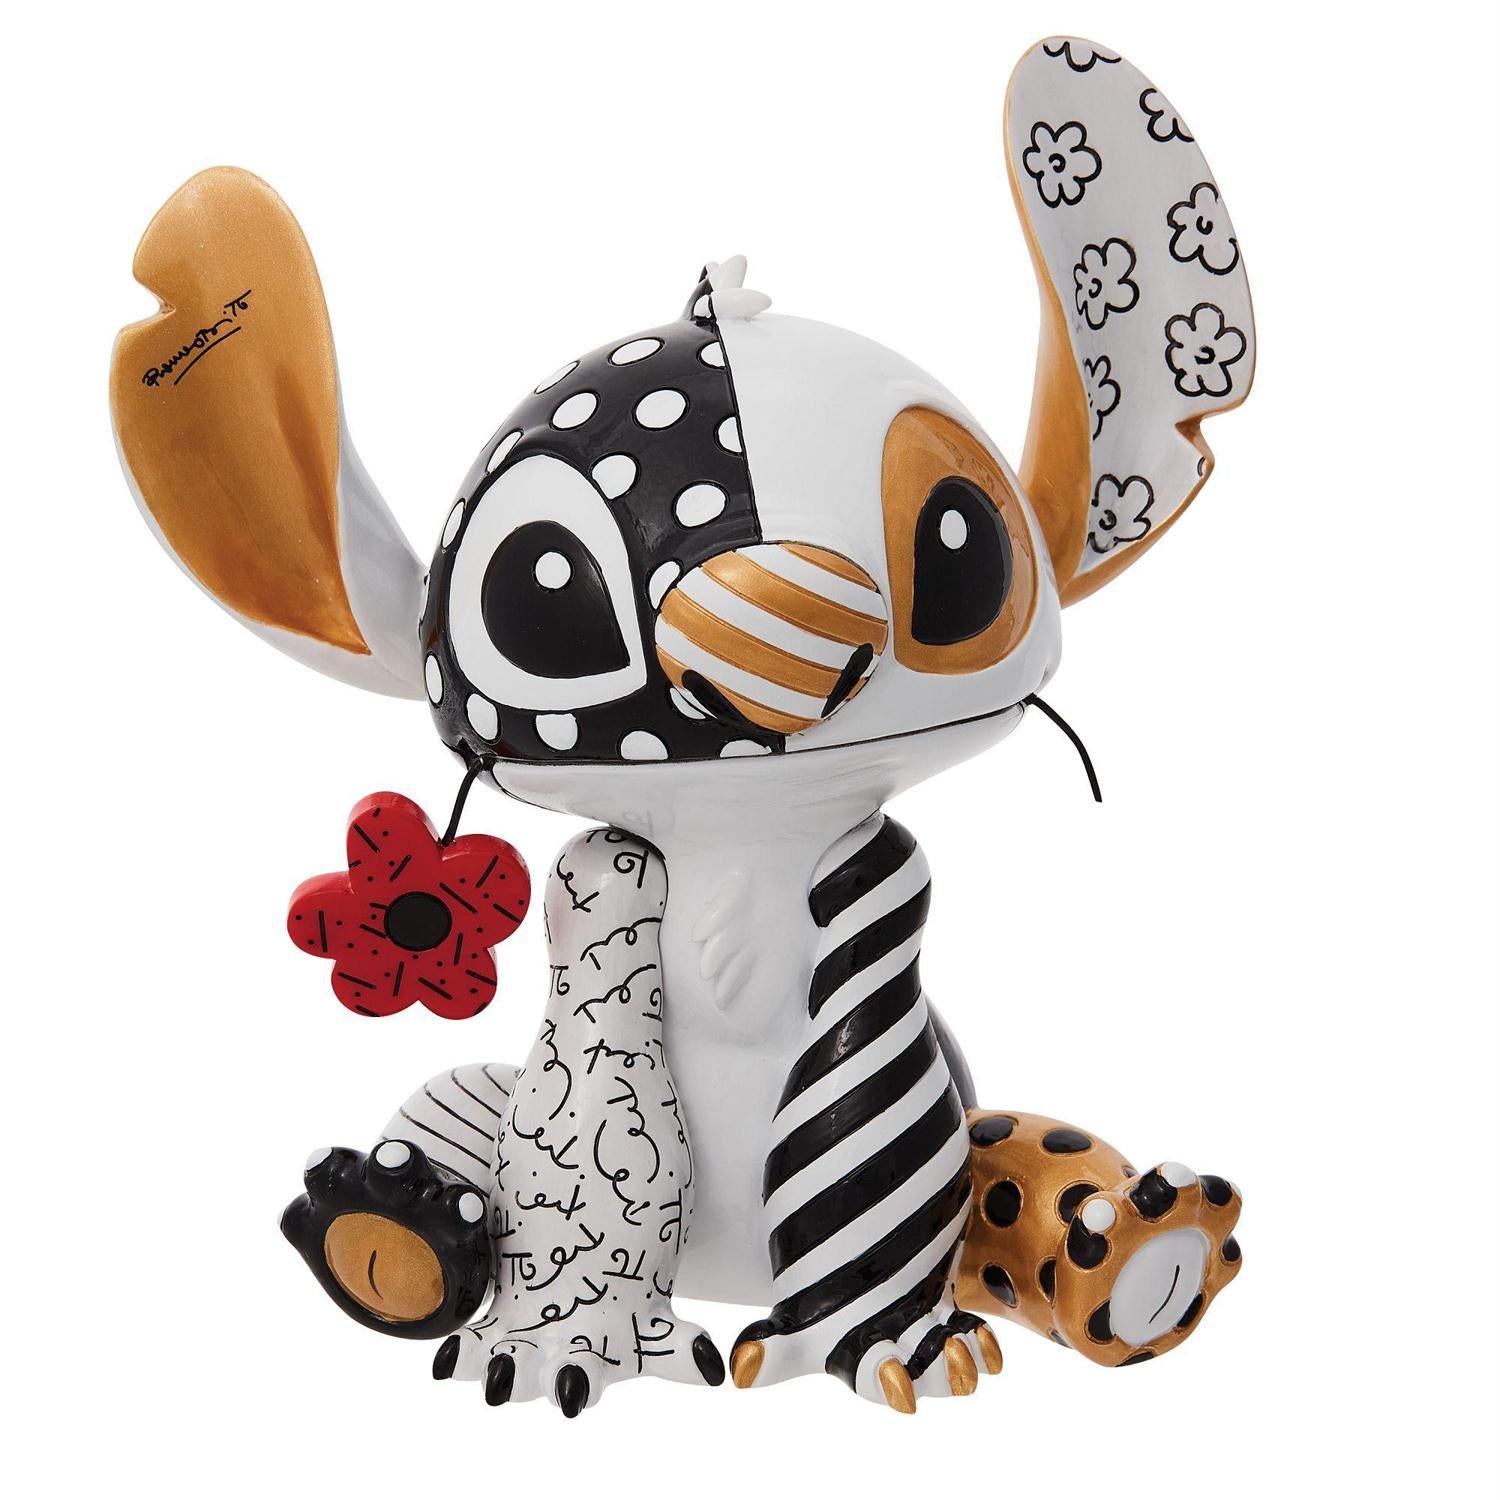 Midas Stitch with a red daisy in his mouth - figurine 